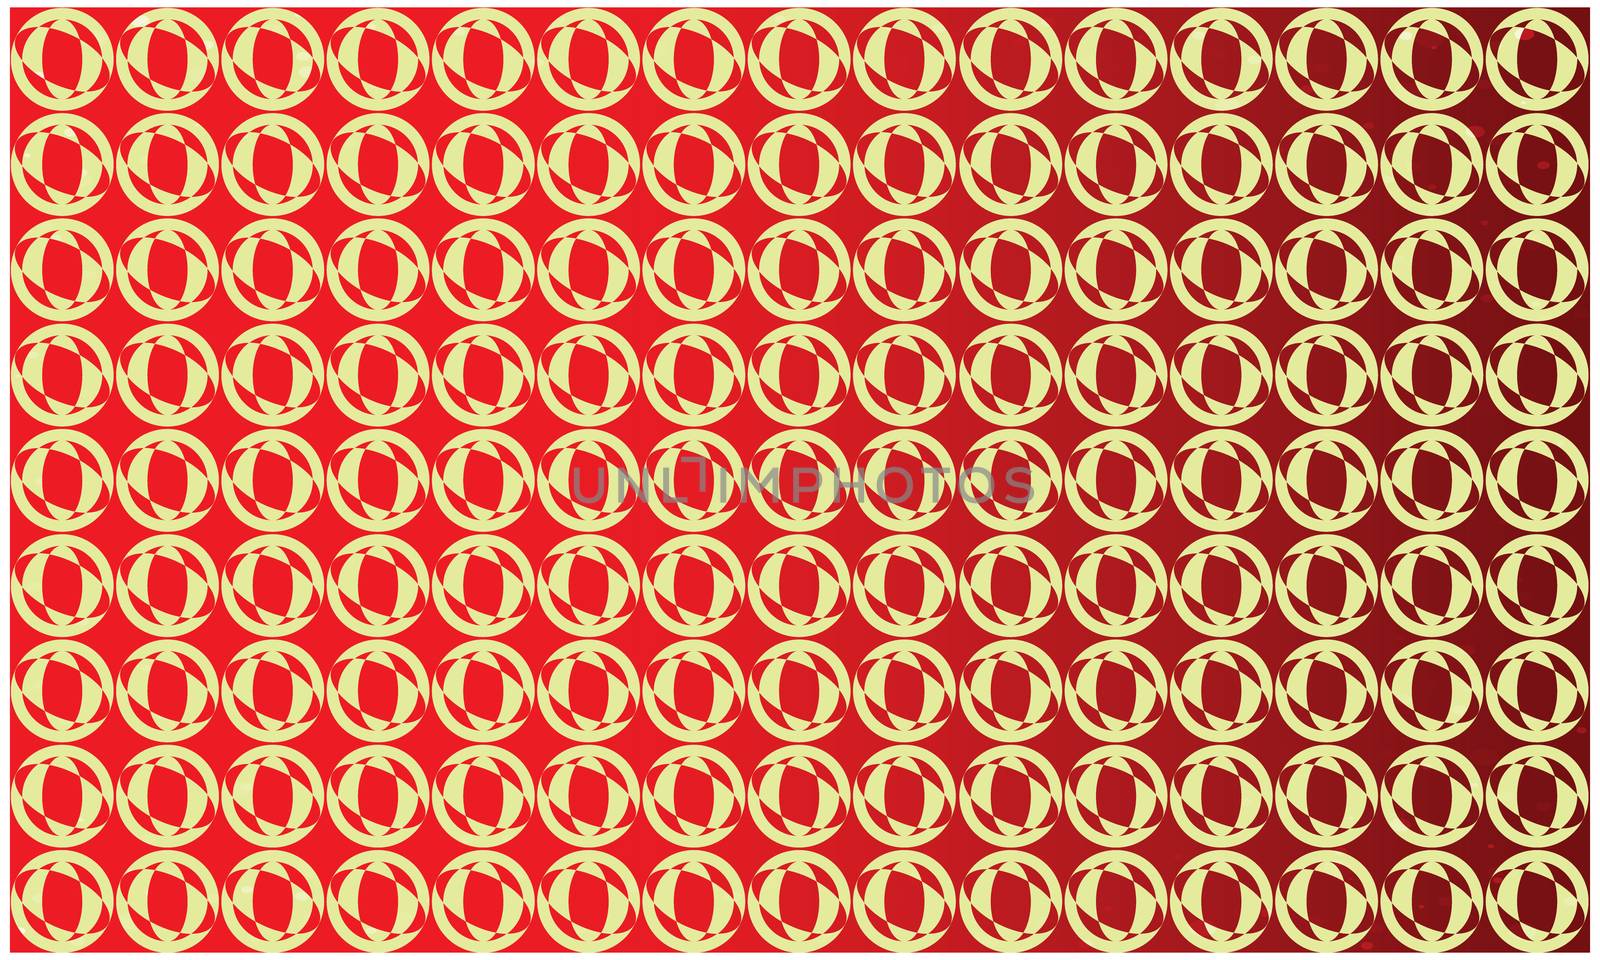 circles and ovals on abstract red background